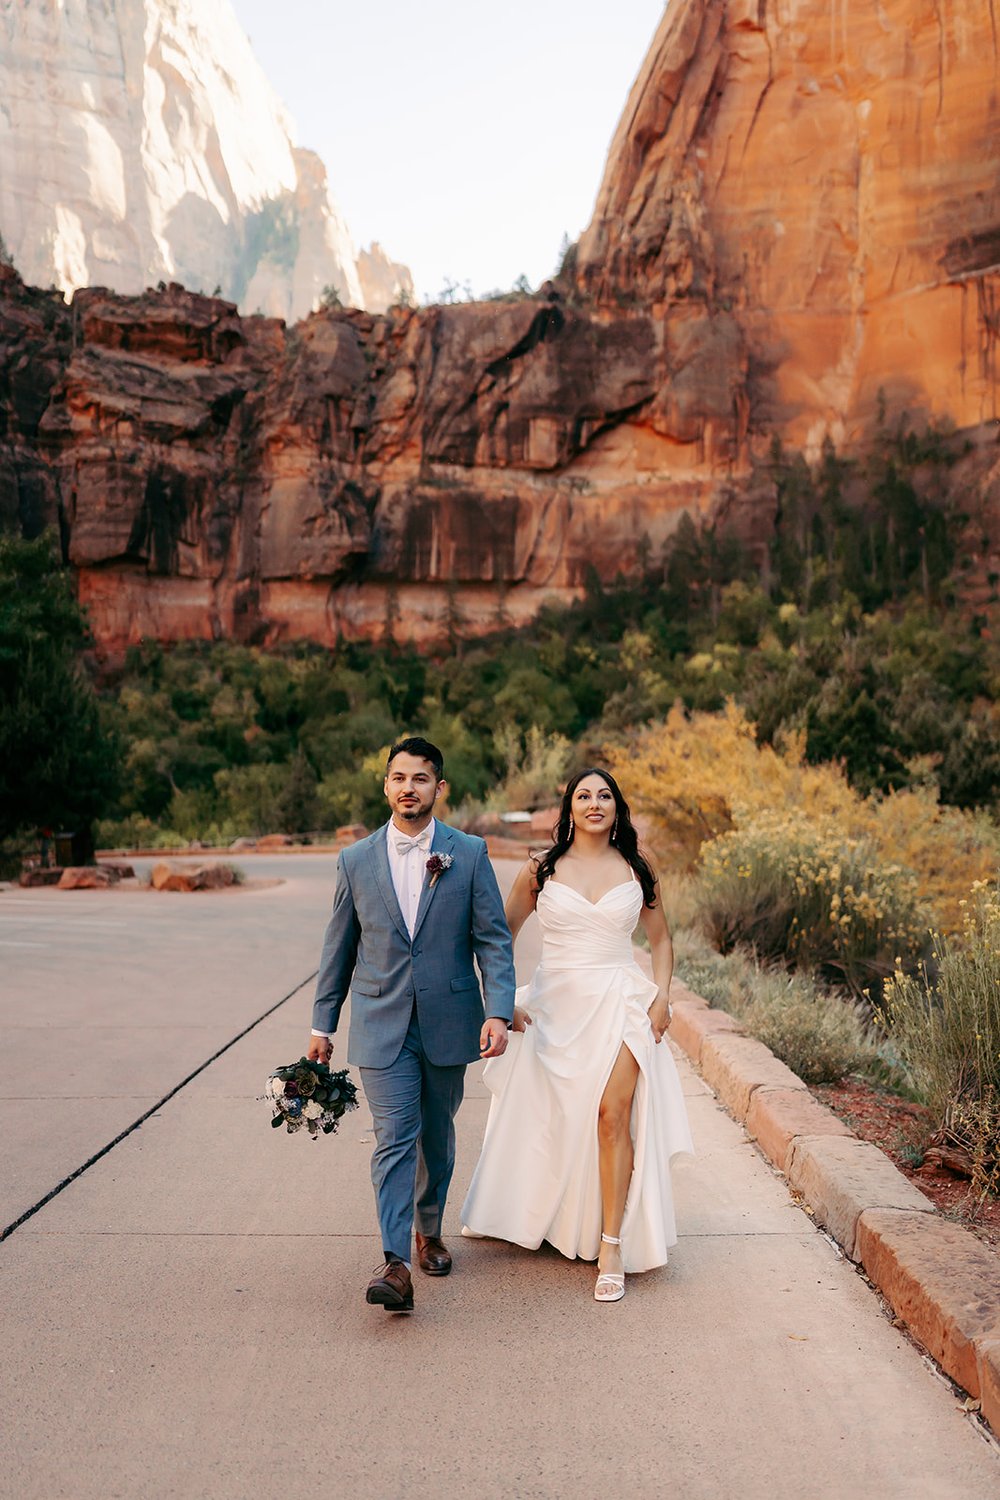  Bride and Groom holding hands during golden hour at Zion National Park 